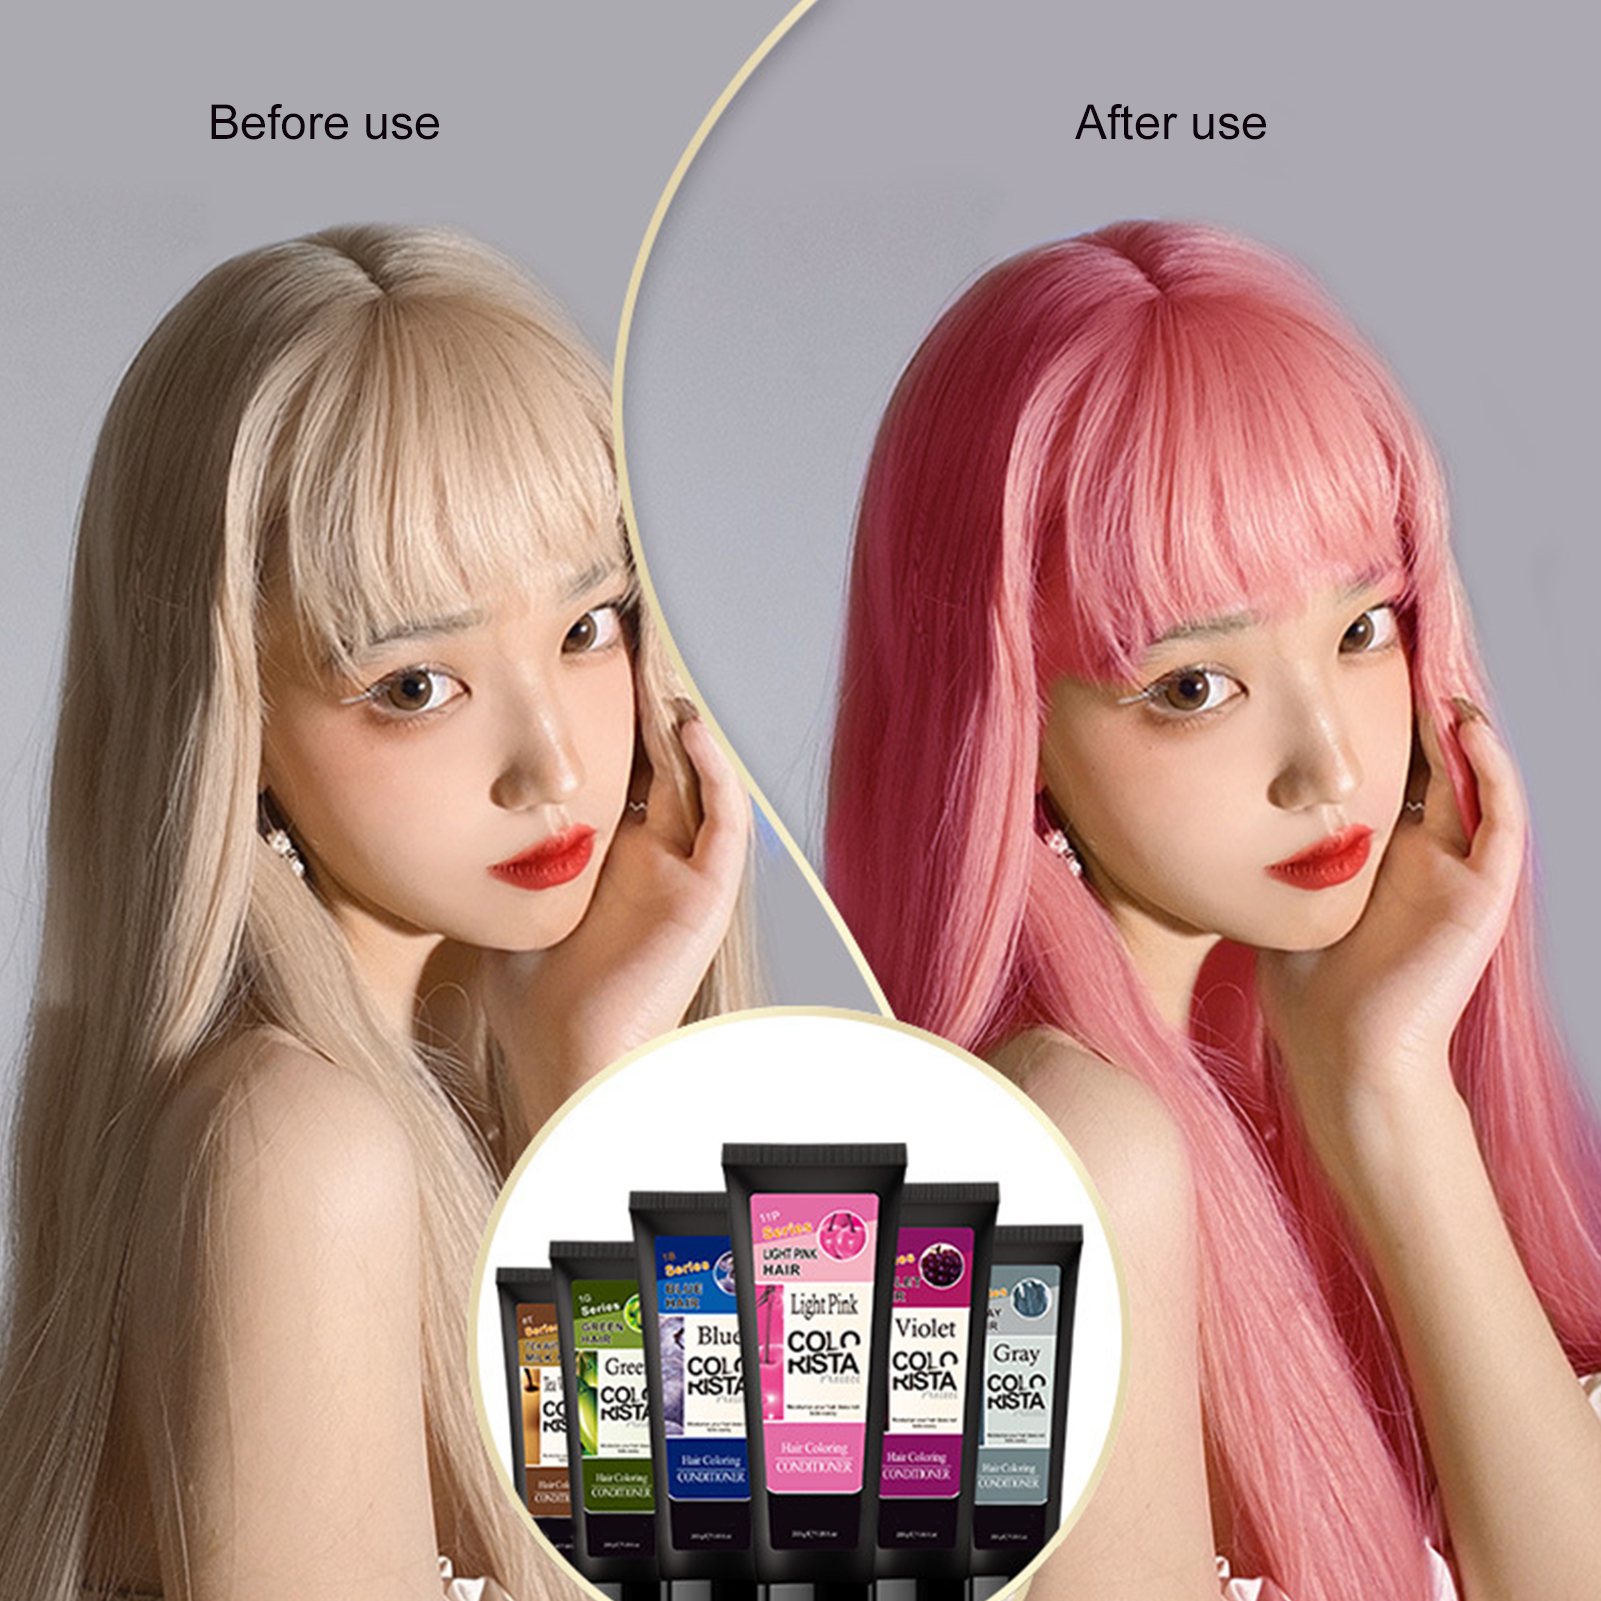 Kaola 200ml Multifunctional Hair Coloring Conditioner Long Lasting Improve Frizz Color Locking Repair Complementary Conditioner for Daily Use - image 3 of 8